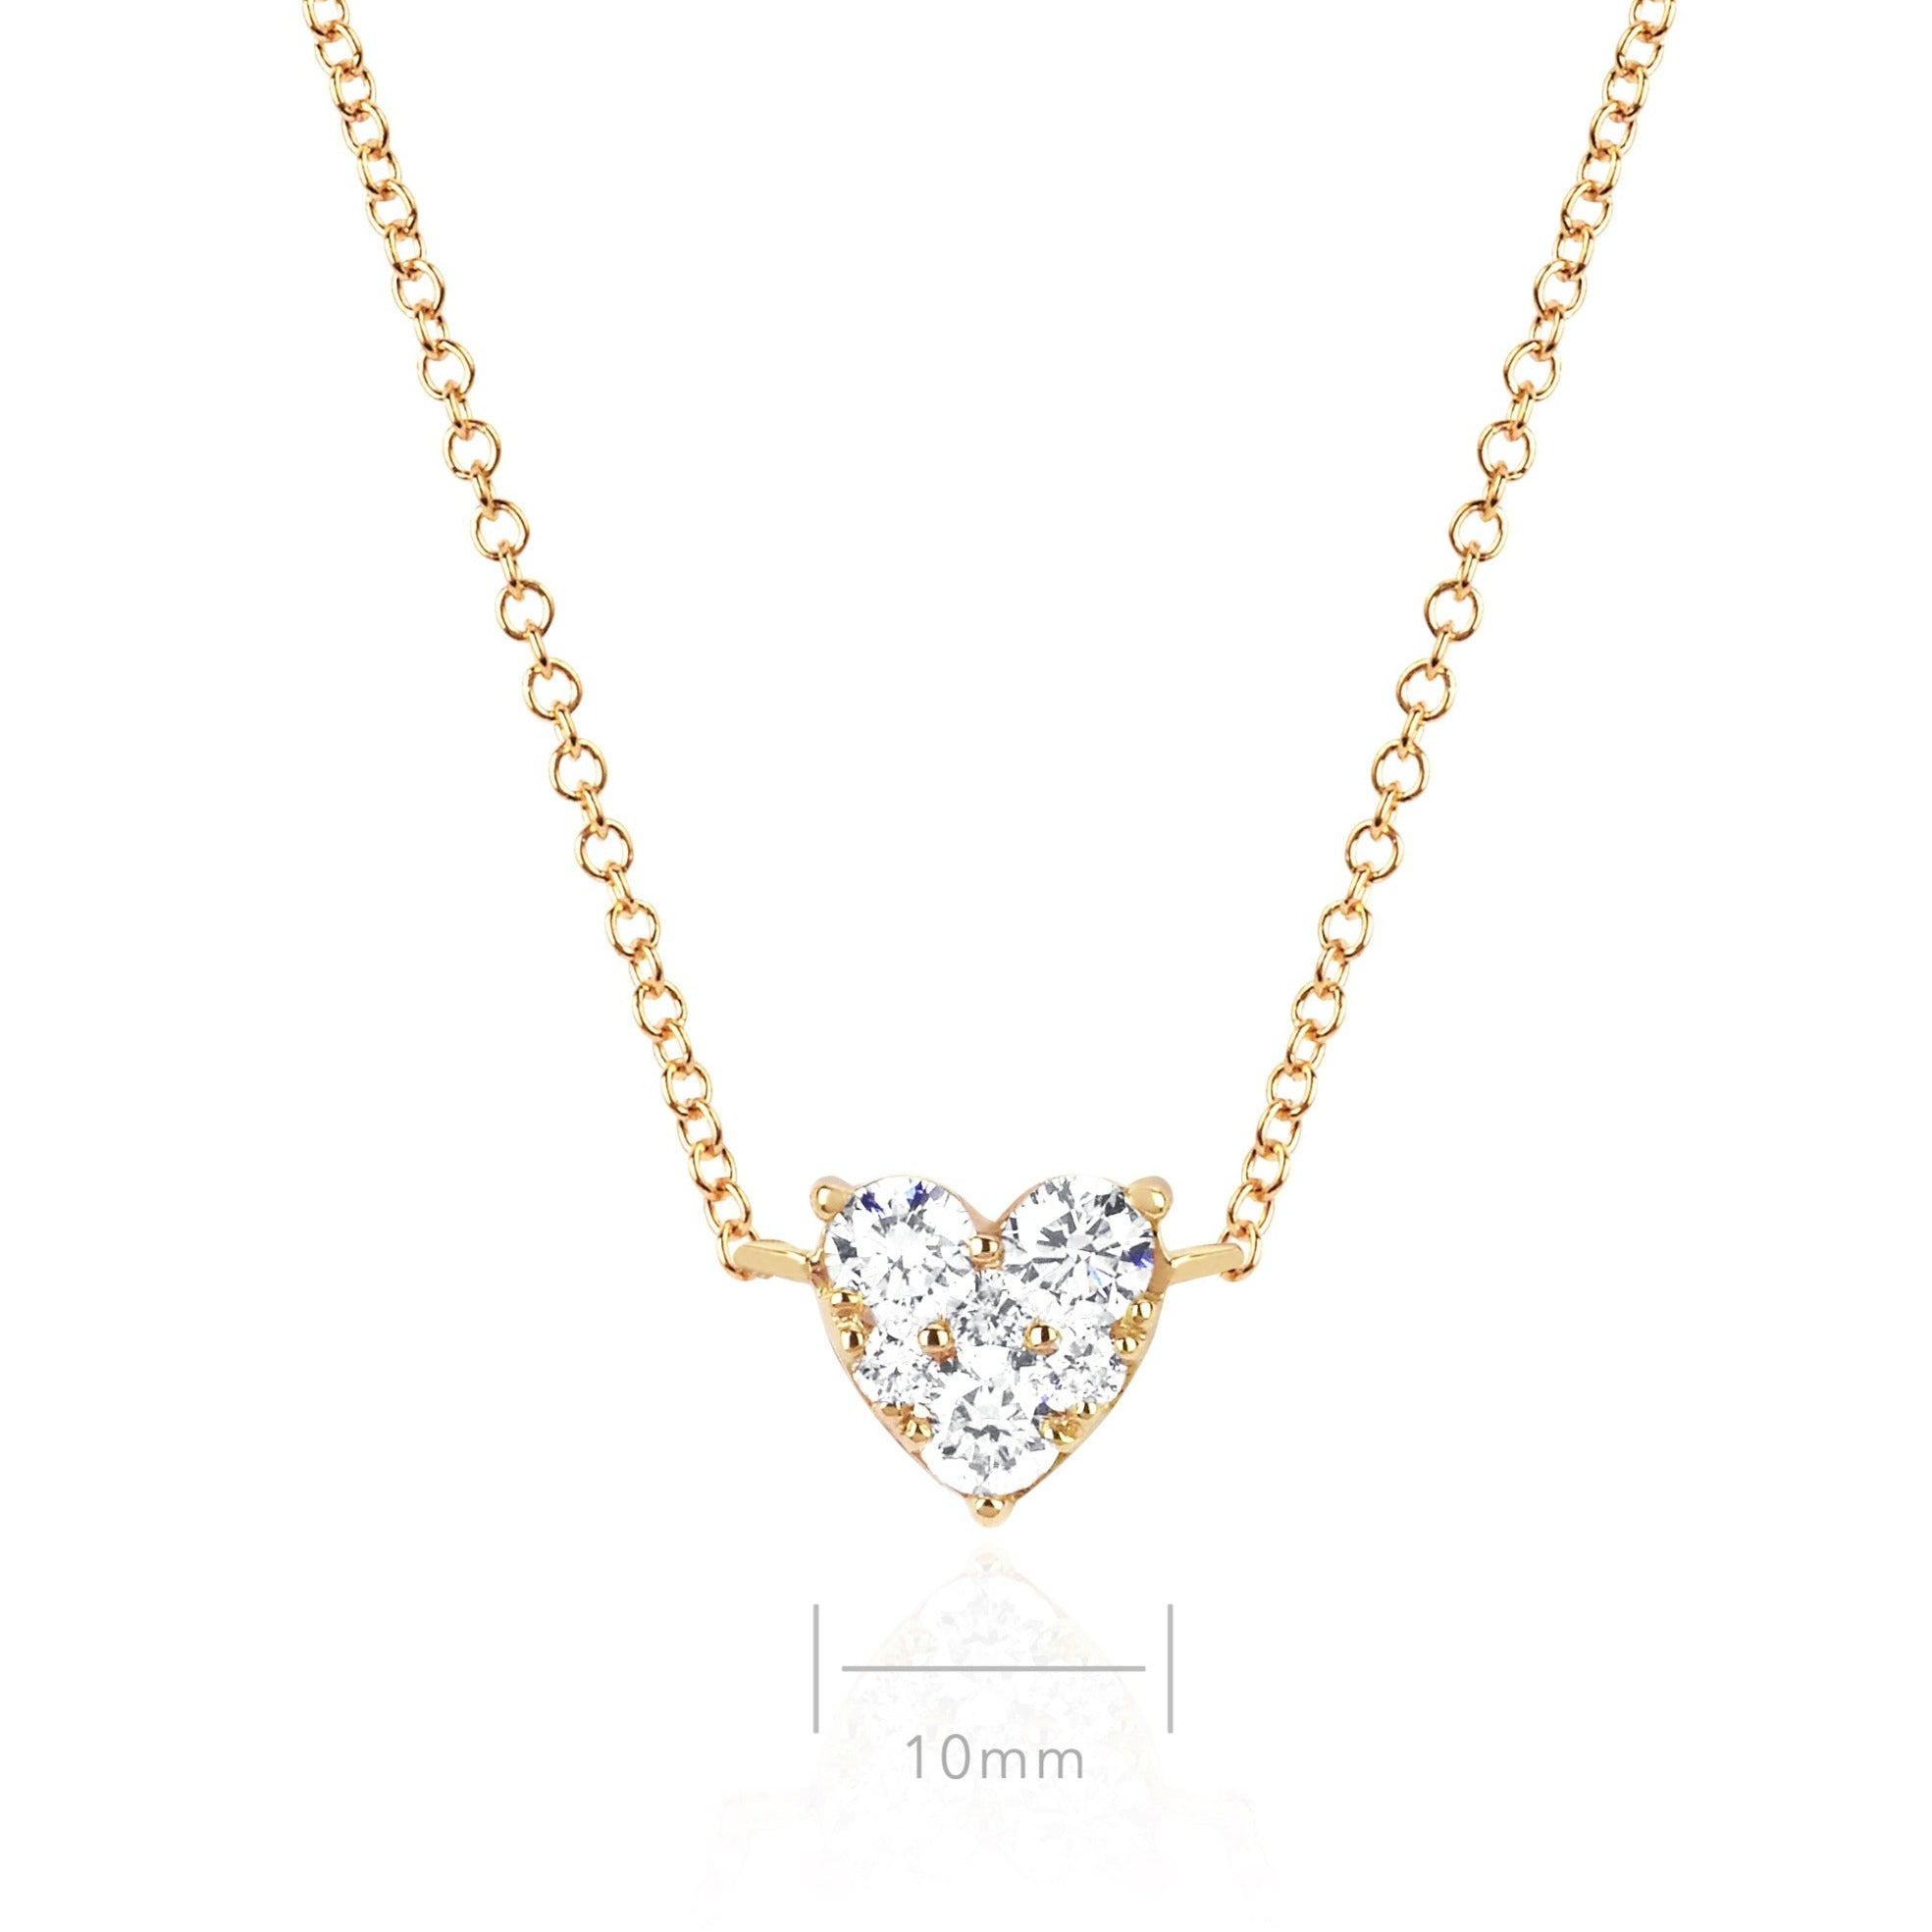 Full Cut Diamond Heart Choker Necklace in 14k Yellow Gold with Size Reference of 10mm pendant